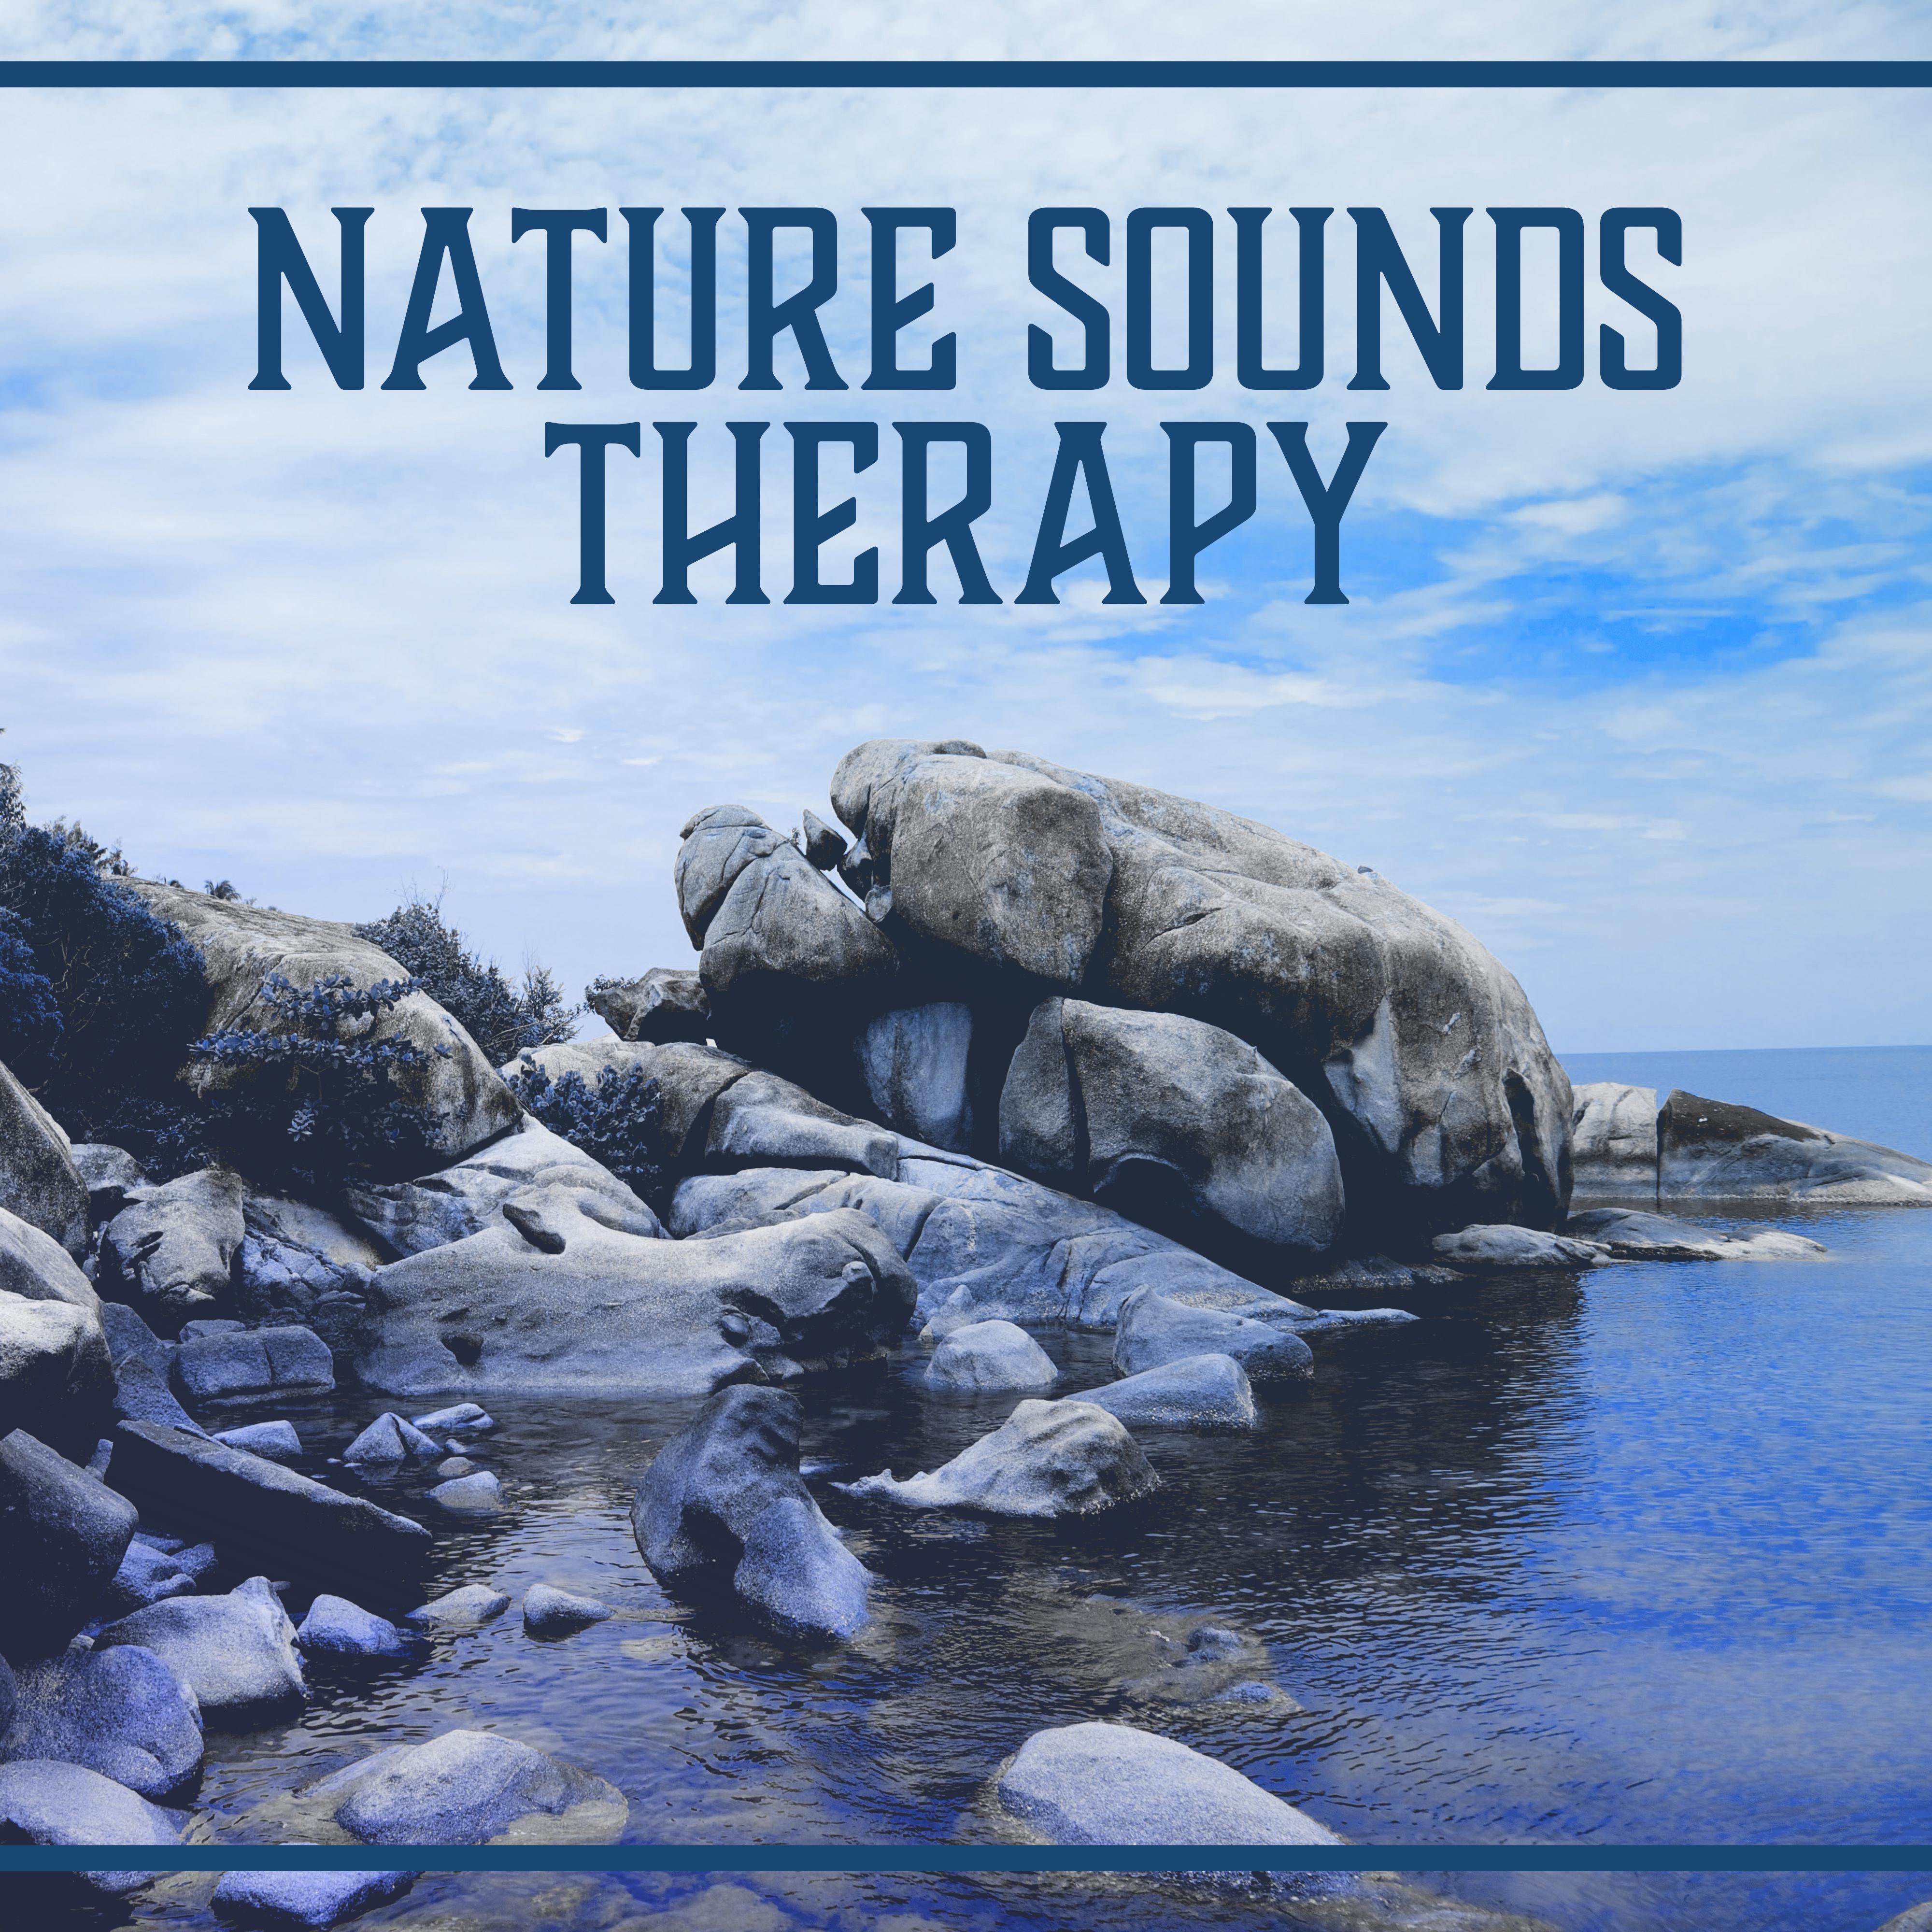 Nature Sounds Therapy  New Age Music, Relaxation, Deep Rest, Relaxing Music, Soothing Instrumental Music